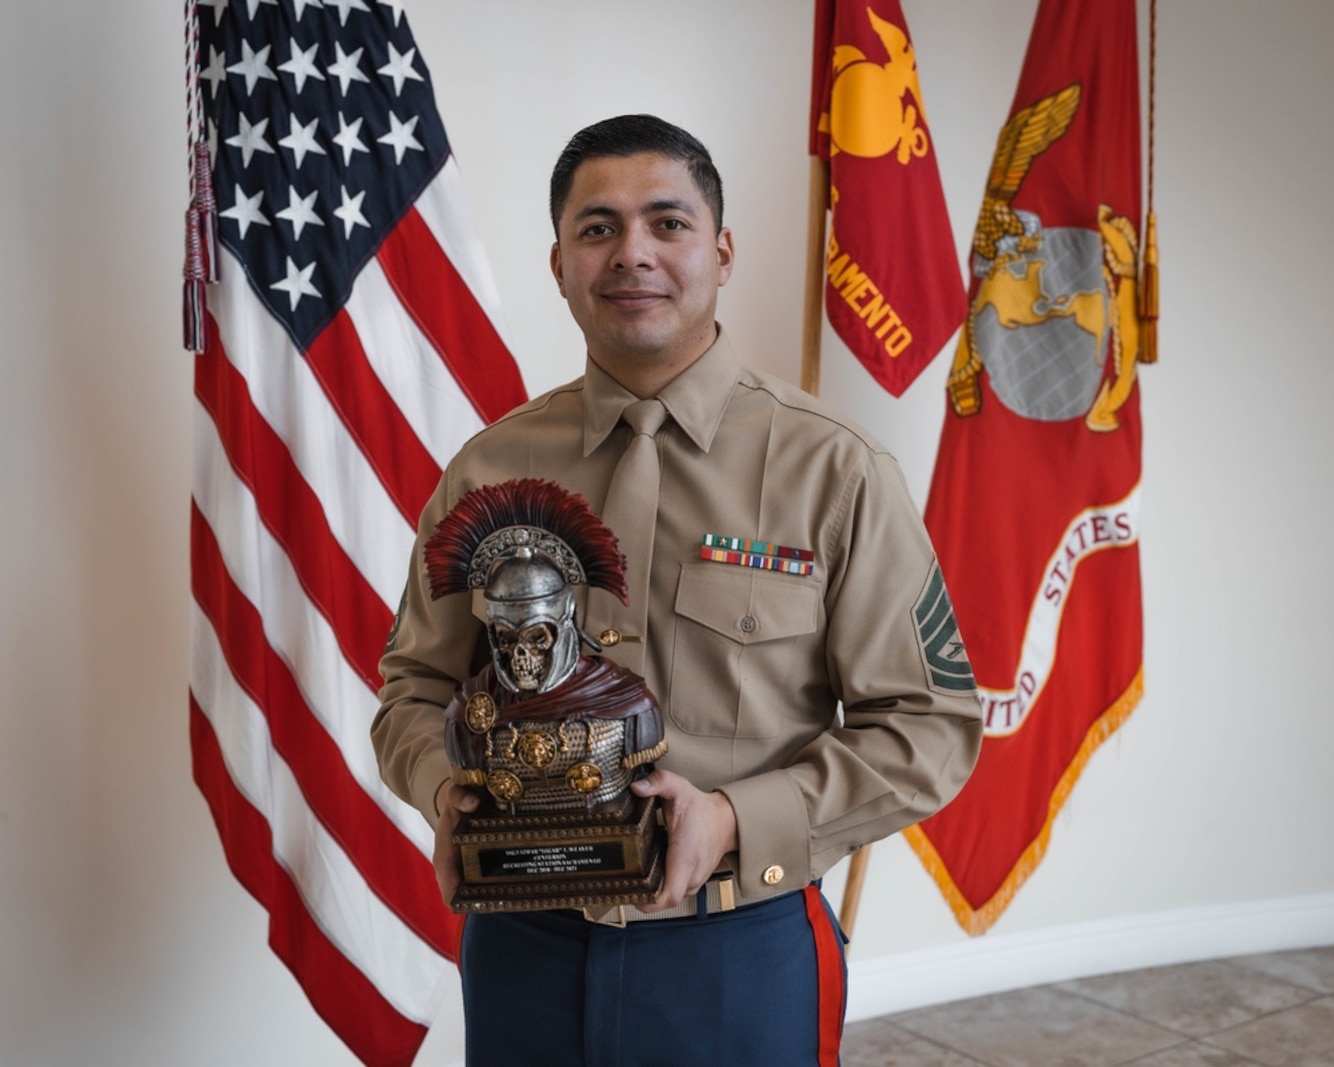 U.S. Marine Corps Gunnery Sgt. Izhar Weaver with Recruiting Station Sacramento was presented the Centurion Award Jan. 3, 2022. The title "Centurion" is only awarded to Marines who write 100 or more contracts during their 36 months on recruiting duty. (U.S. Marine Corps photo by Sgt. Jocelyn Ontiveros)